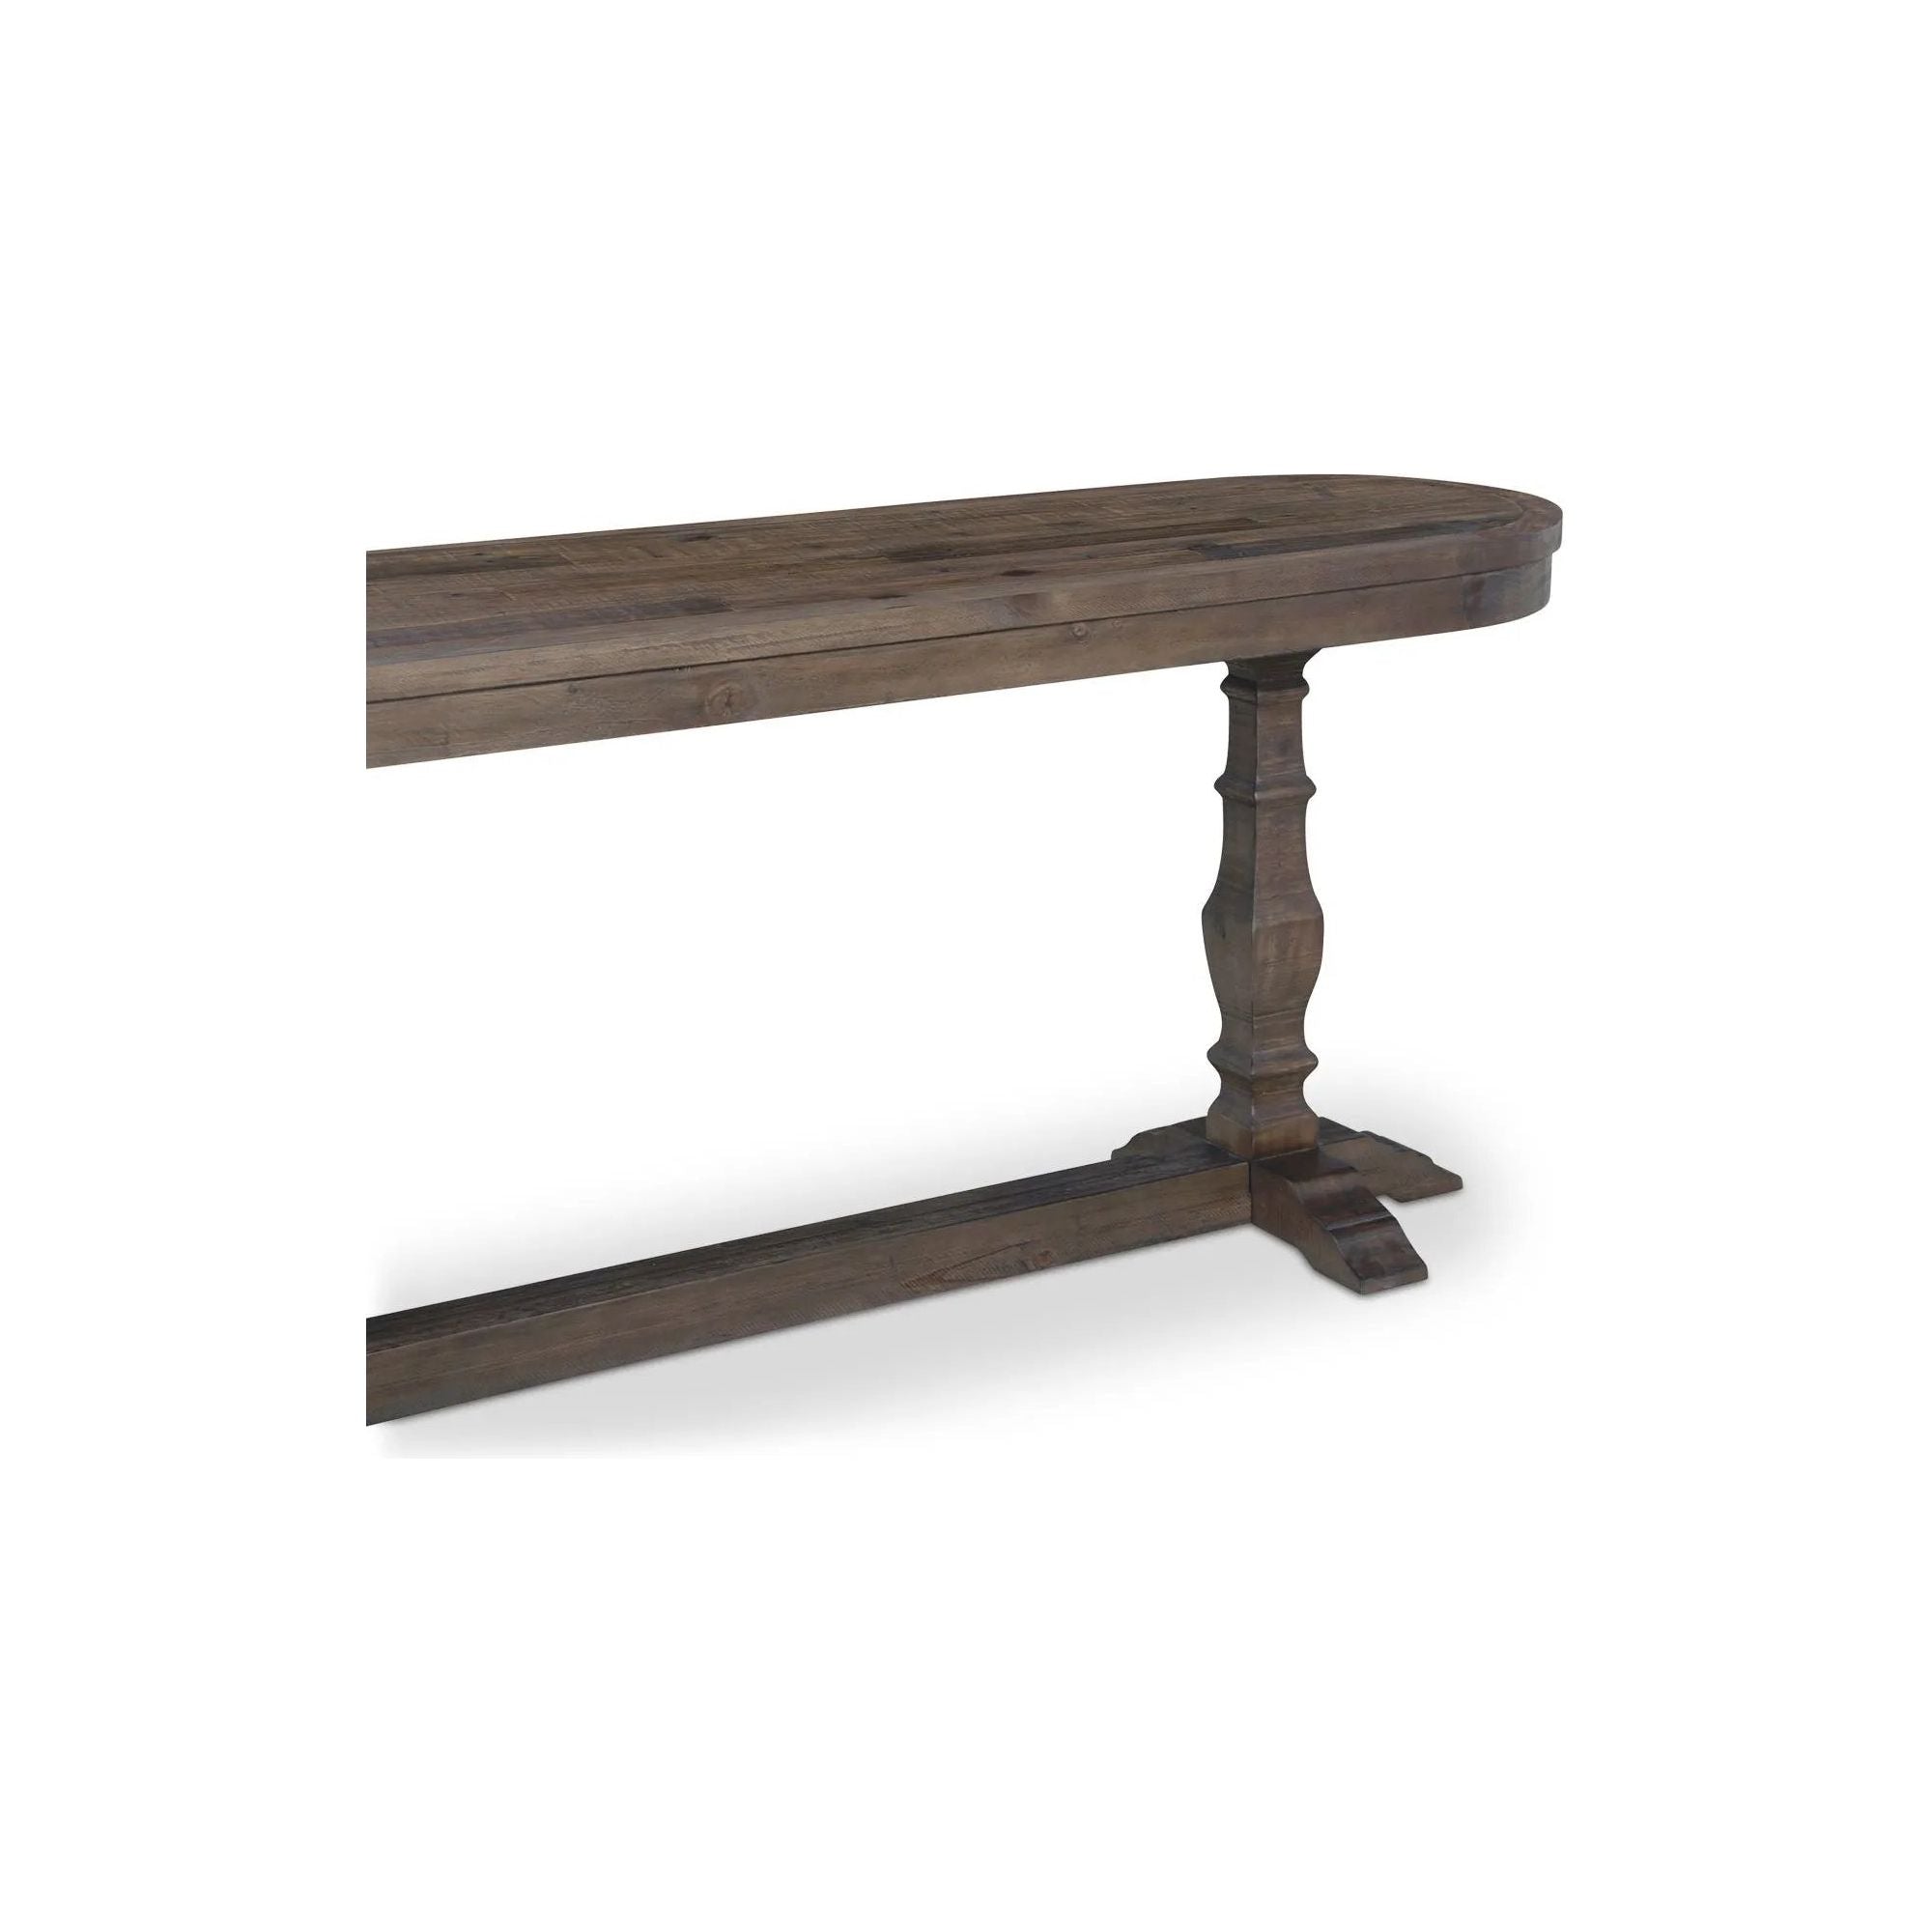 Crafted from reclaimed pine with joinery detailing and a tripod base, tradition and eco-conscious craftsmanship come together in the Georgia console table -- a showcase of the beauty of imperfections with unique markings, knots, and nail holes that add character and vintage appeal. Amethyst Home provides interior design, new home construction design consulting, vintage area rugs, and lighting in the Newport Beach metro area.